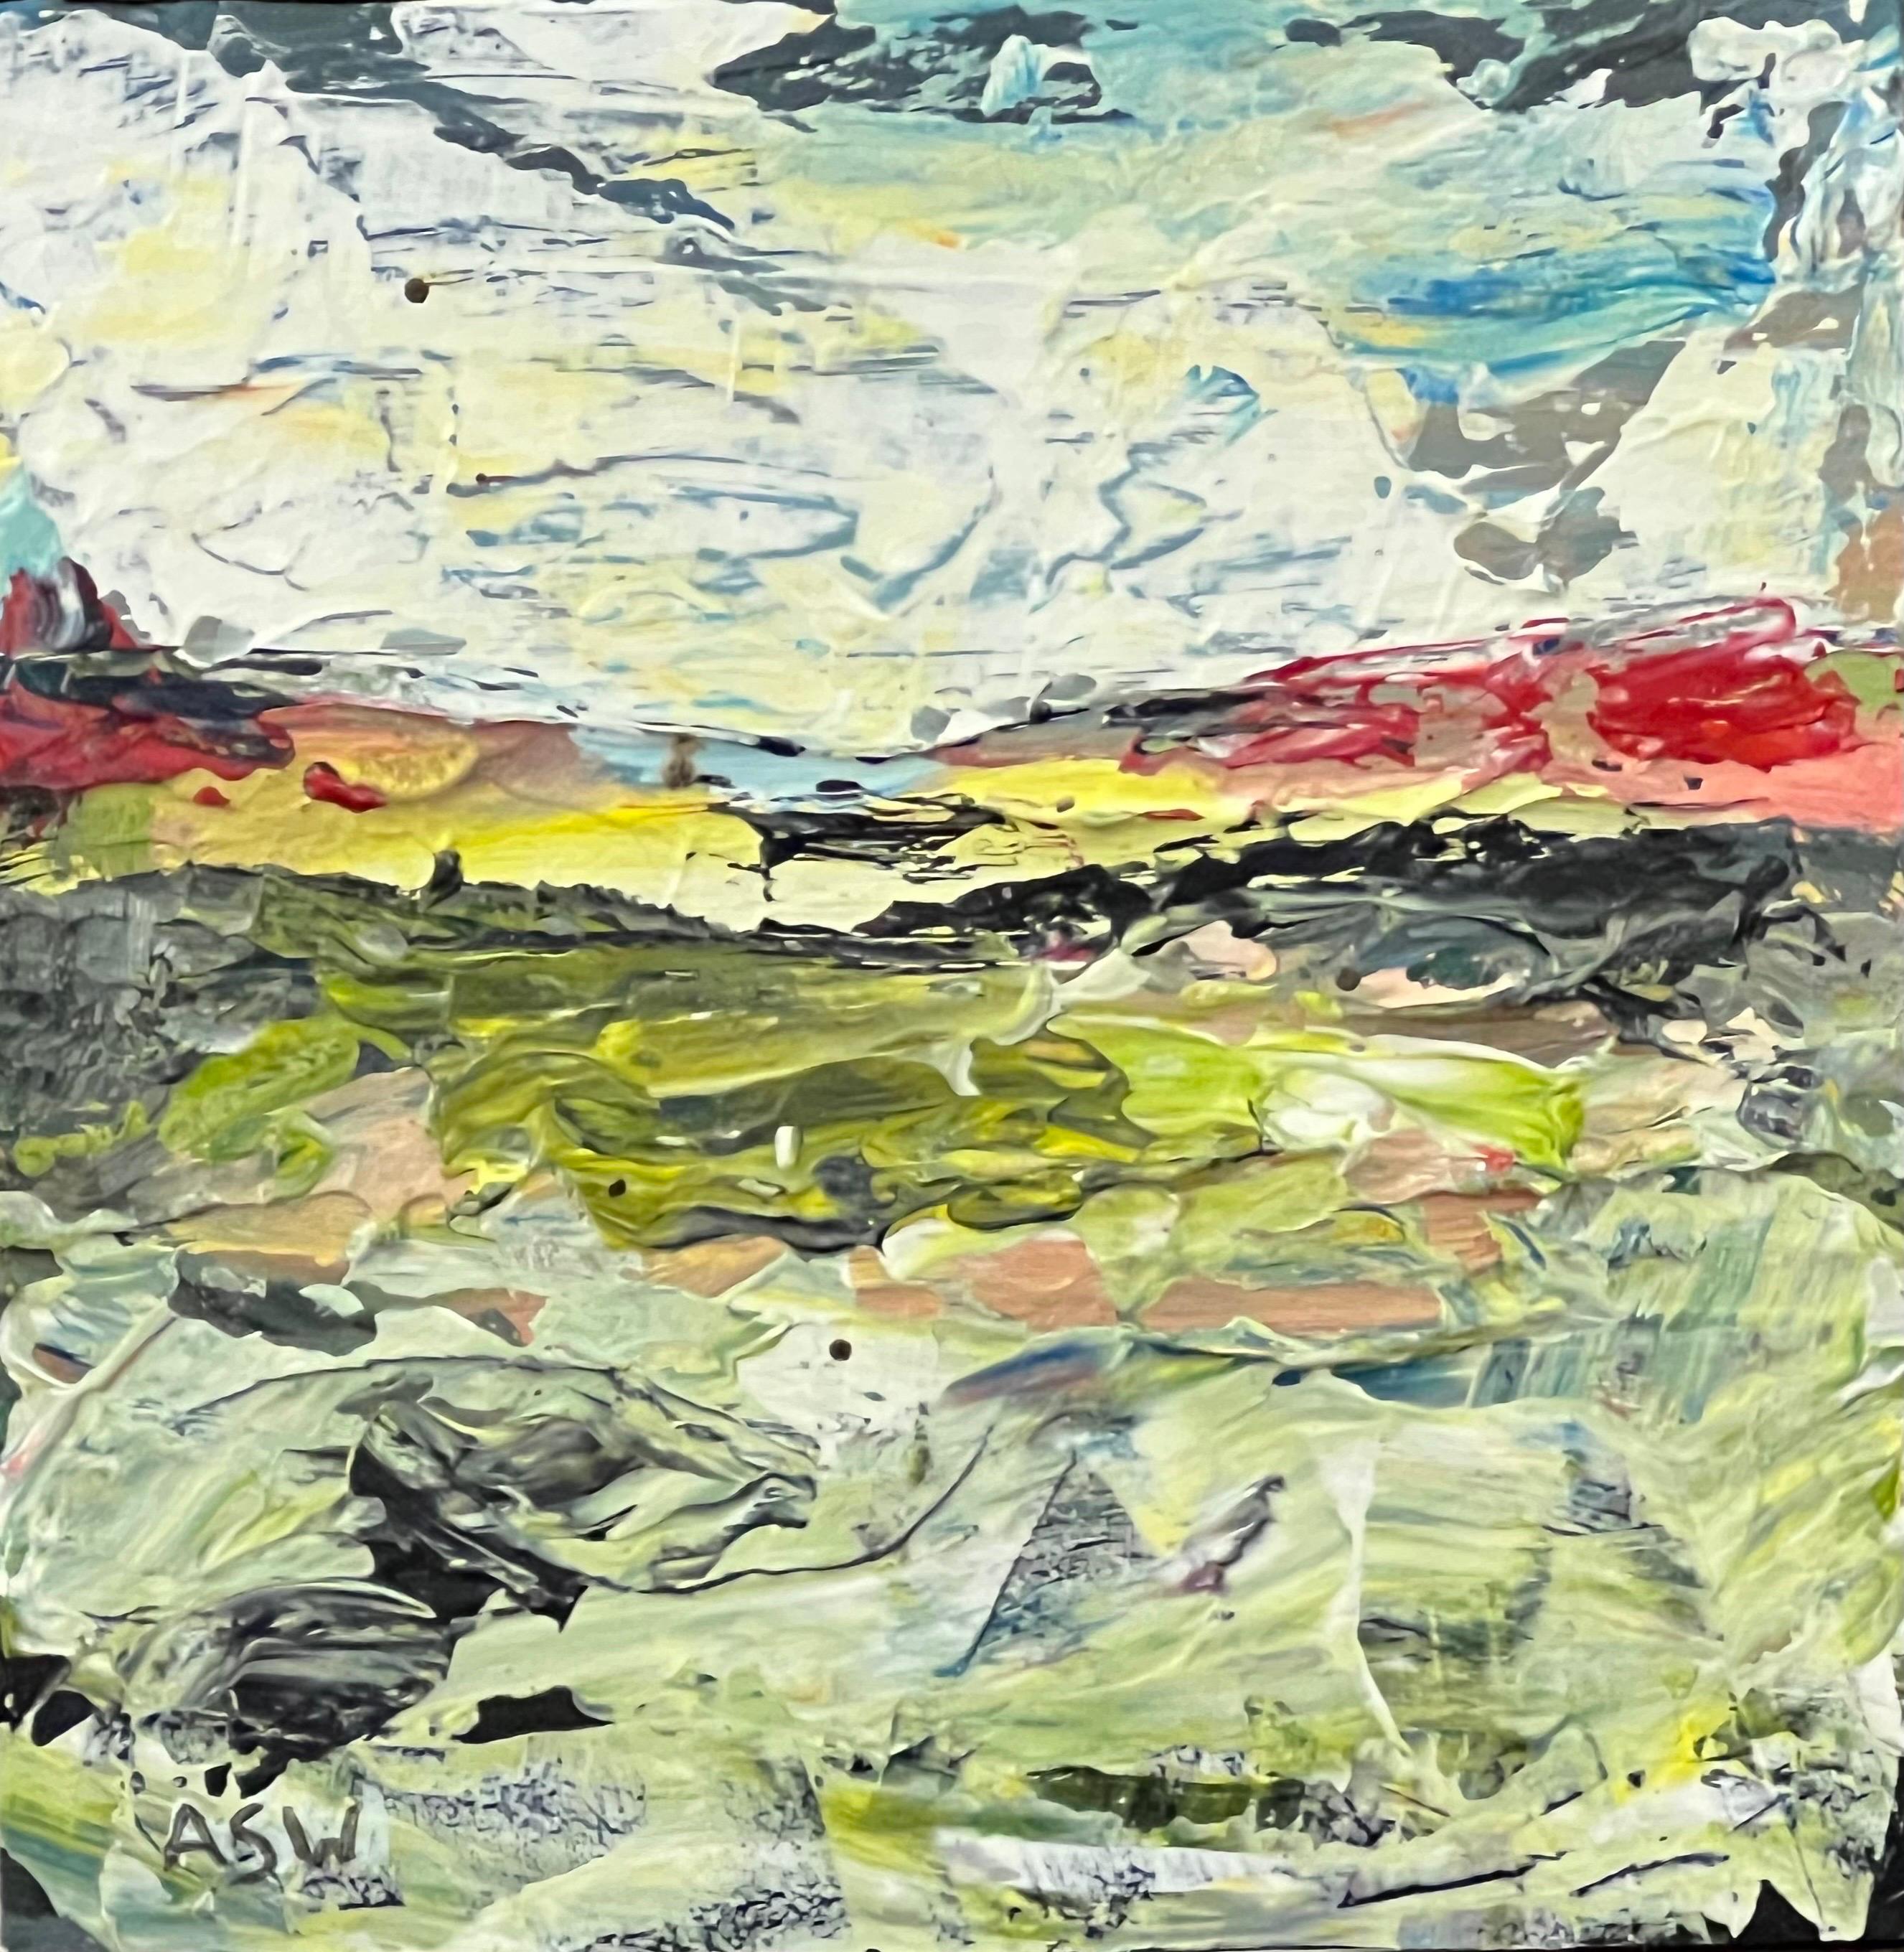 Impasto Abstract Seascape Landscape Miniature Study Contemporary British Artist - Abstract Expressionist Painting by Angela Wakefield